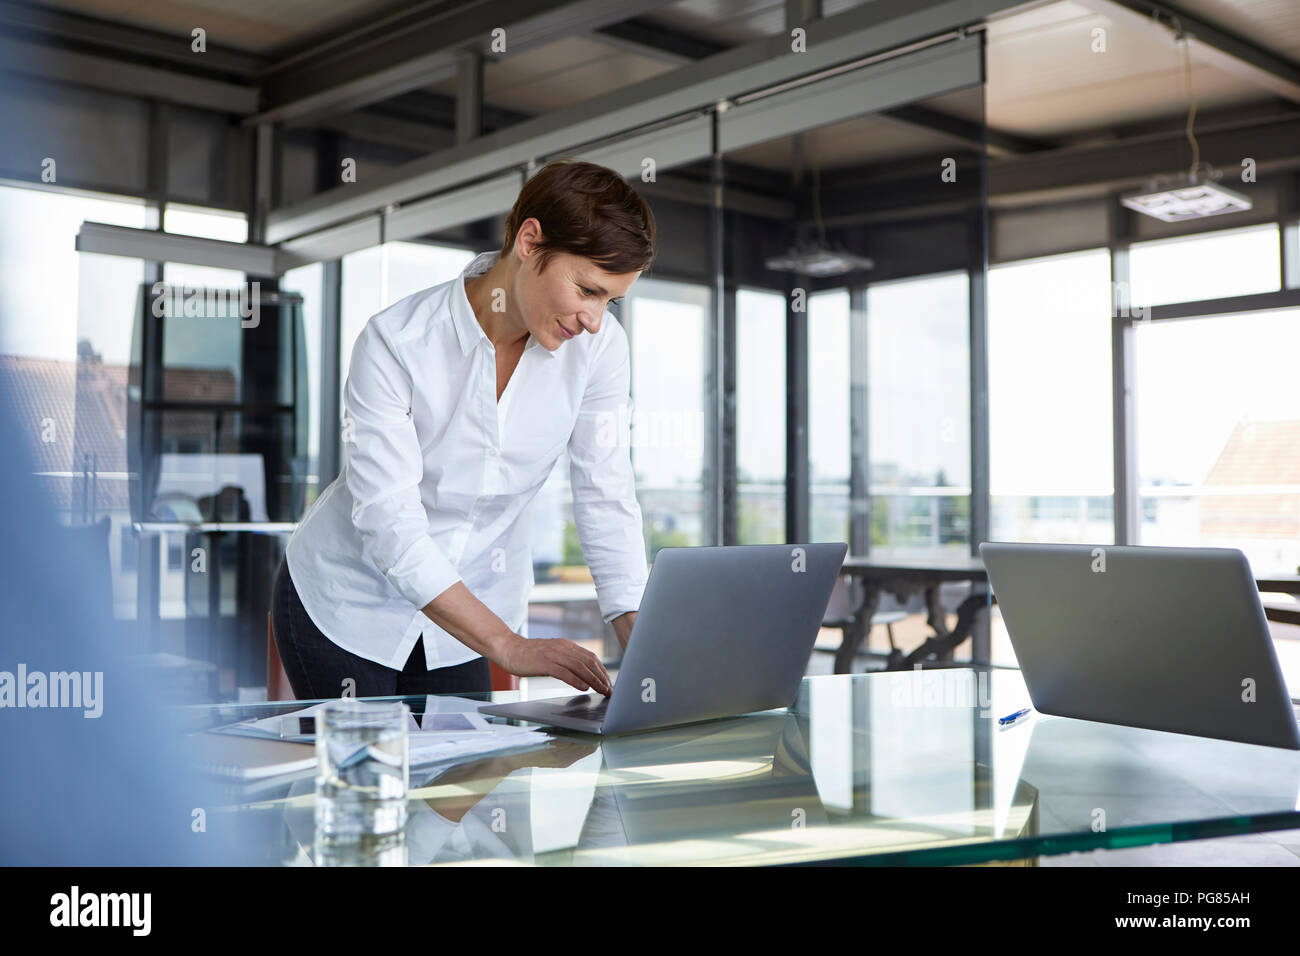 Businesswoman standing at glass table in office using laptop Stock Photo